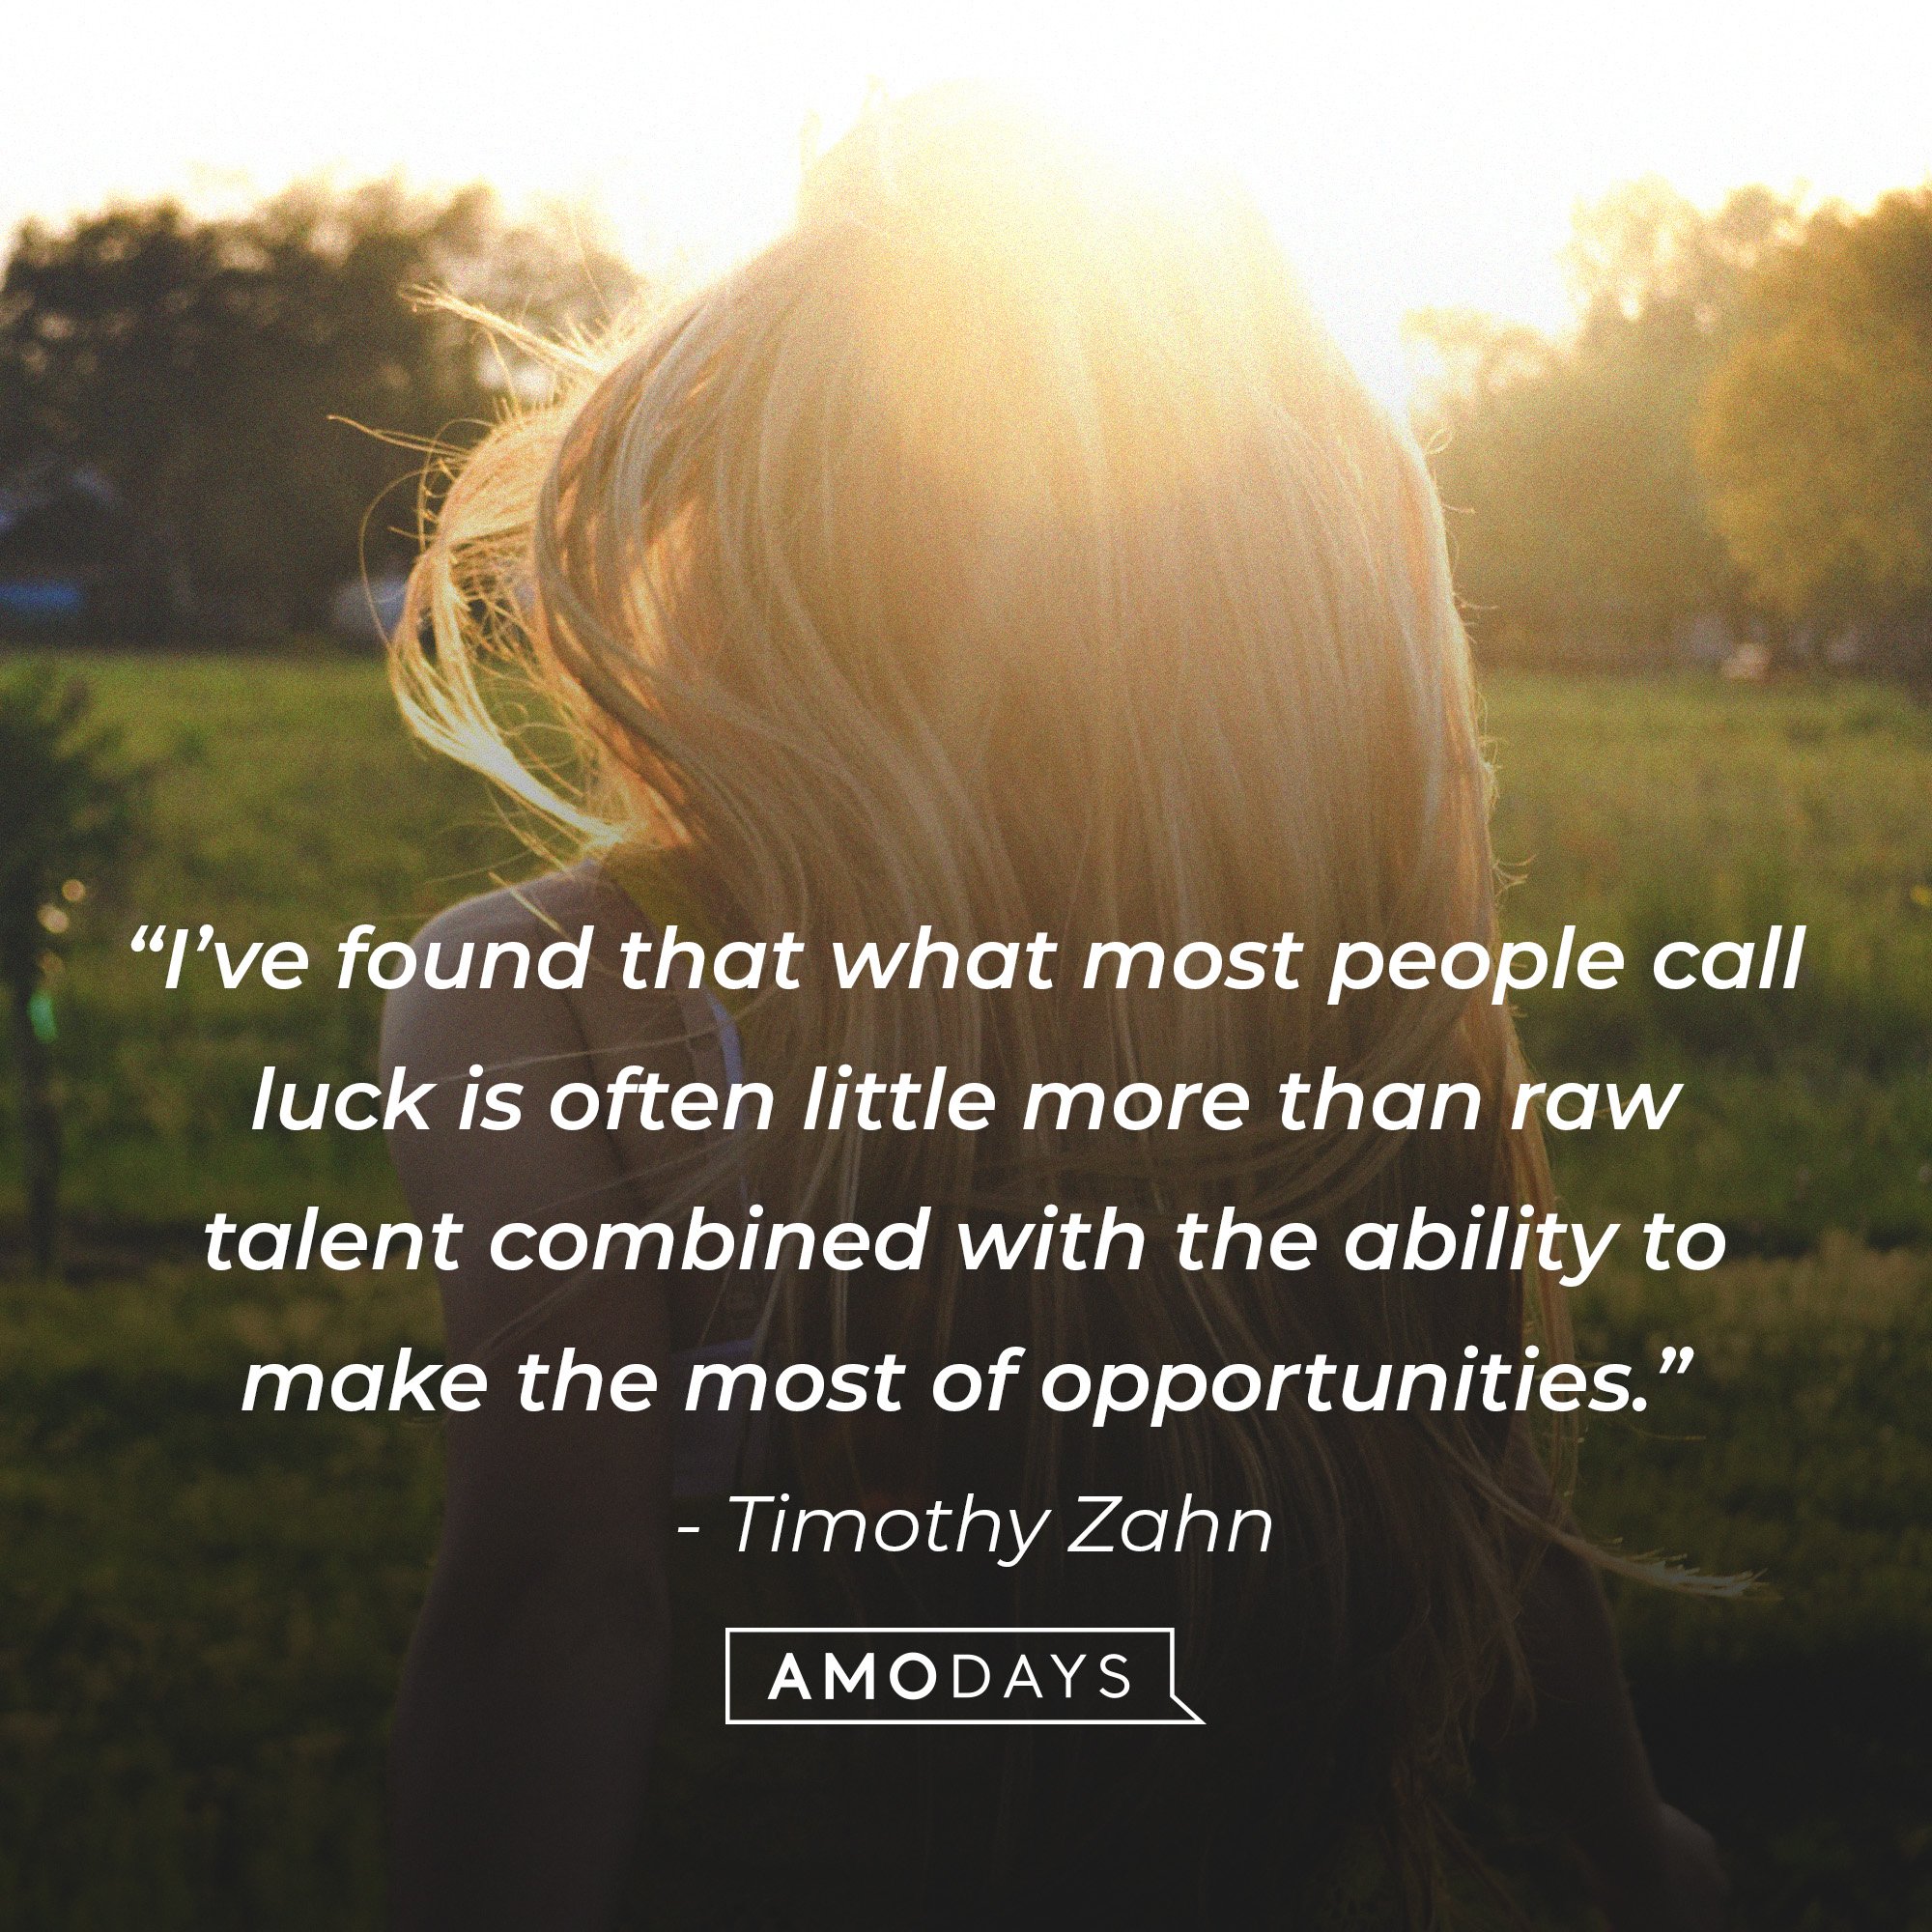 Timothy Zahn's quote: “I’ve found that what most people call luck is often little more than raw talent combined with the ability to make the most of opportunities.” | Image: AmoDays